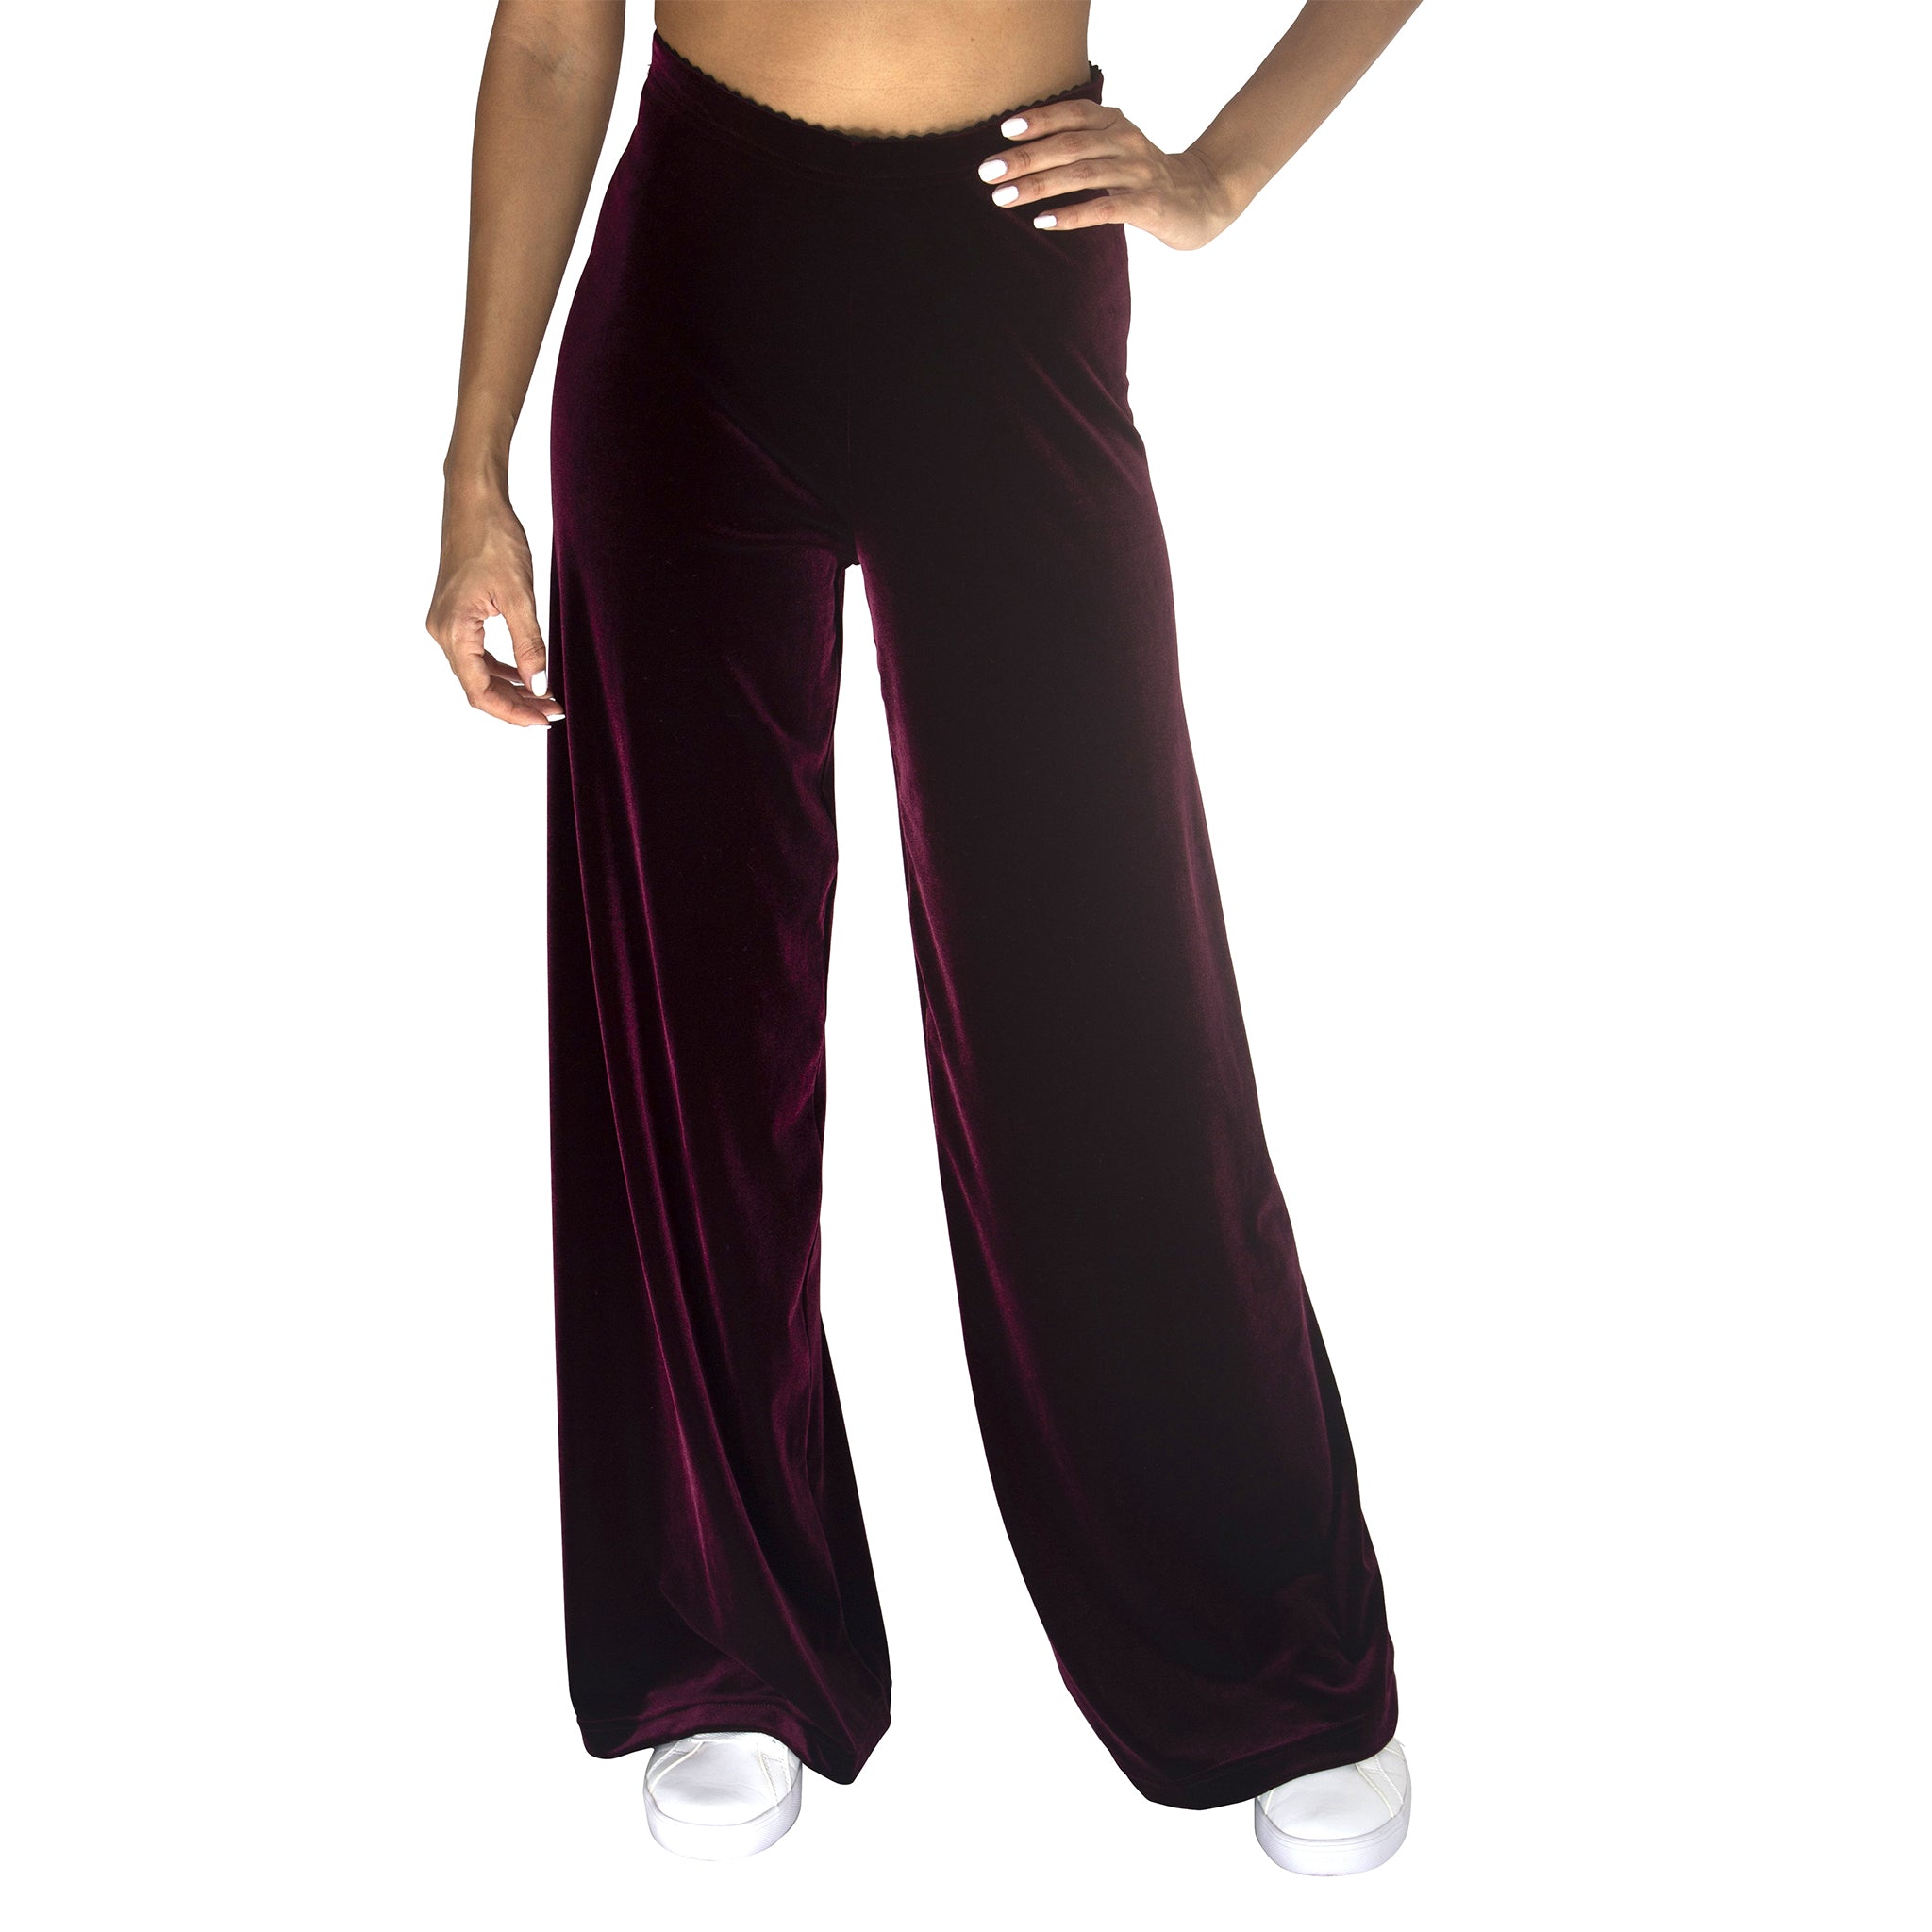 Front view of our Stretch Velvet Pant in Sangria Wine (Burgundy) has elastic waist and 32" inseam.